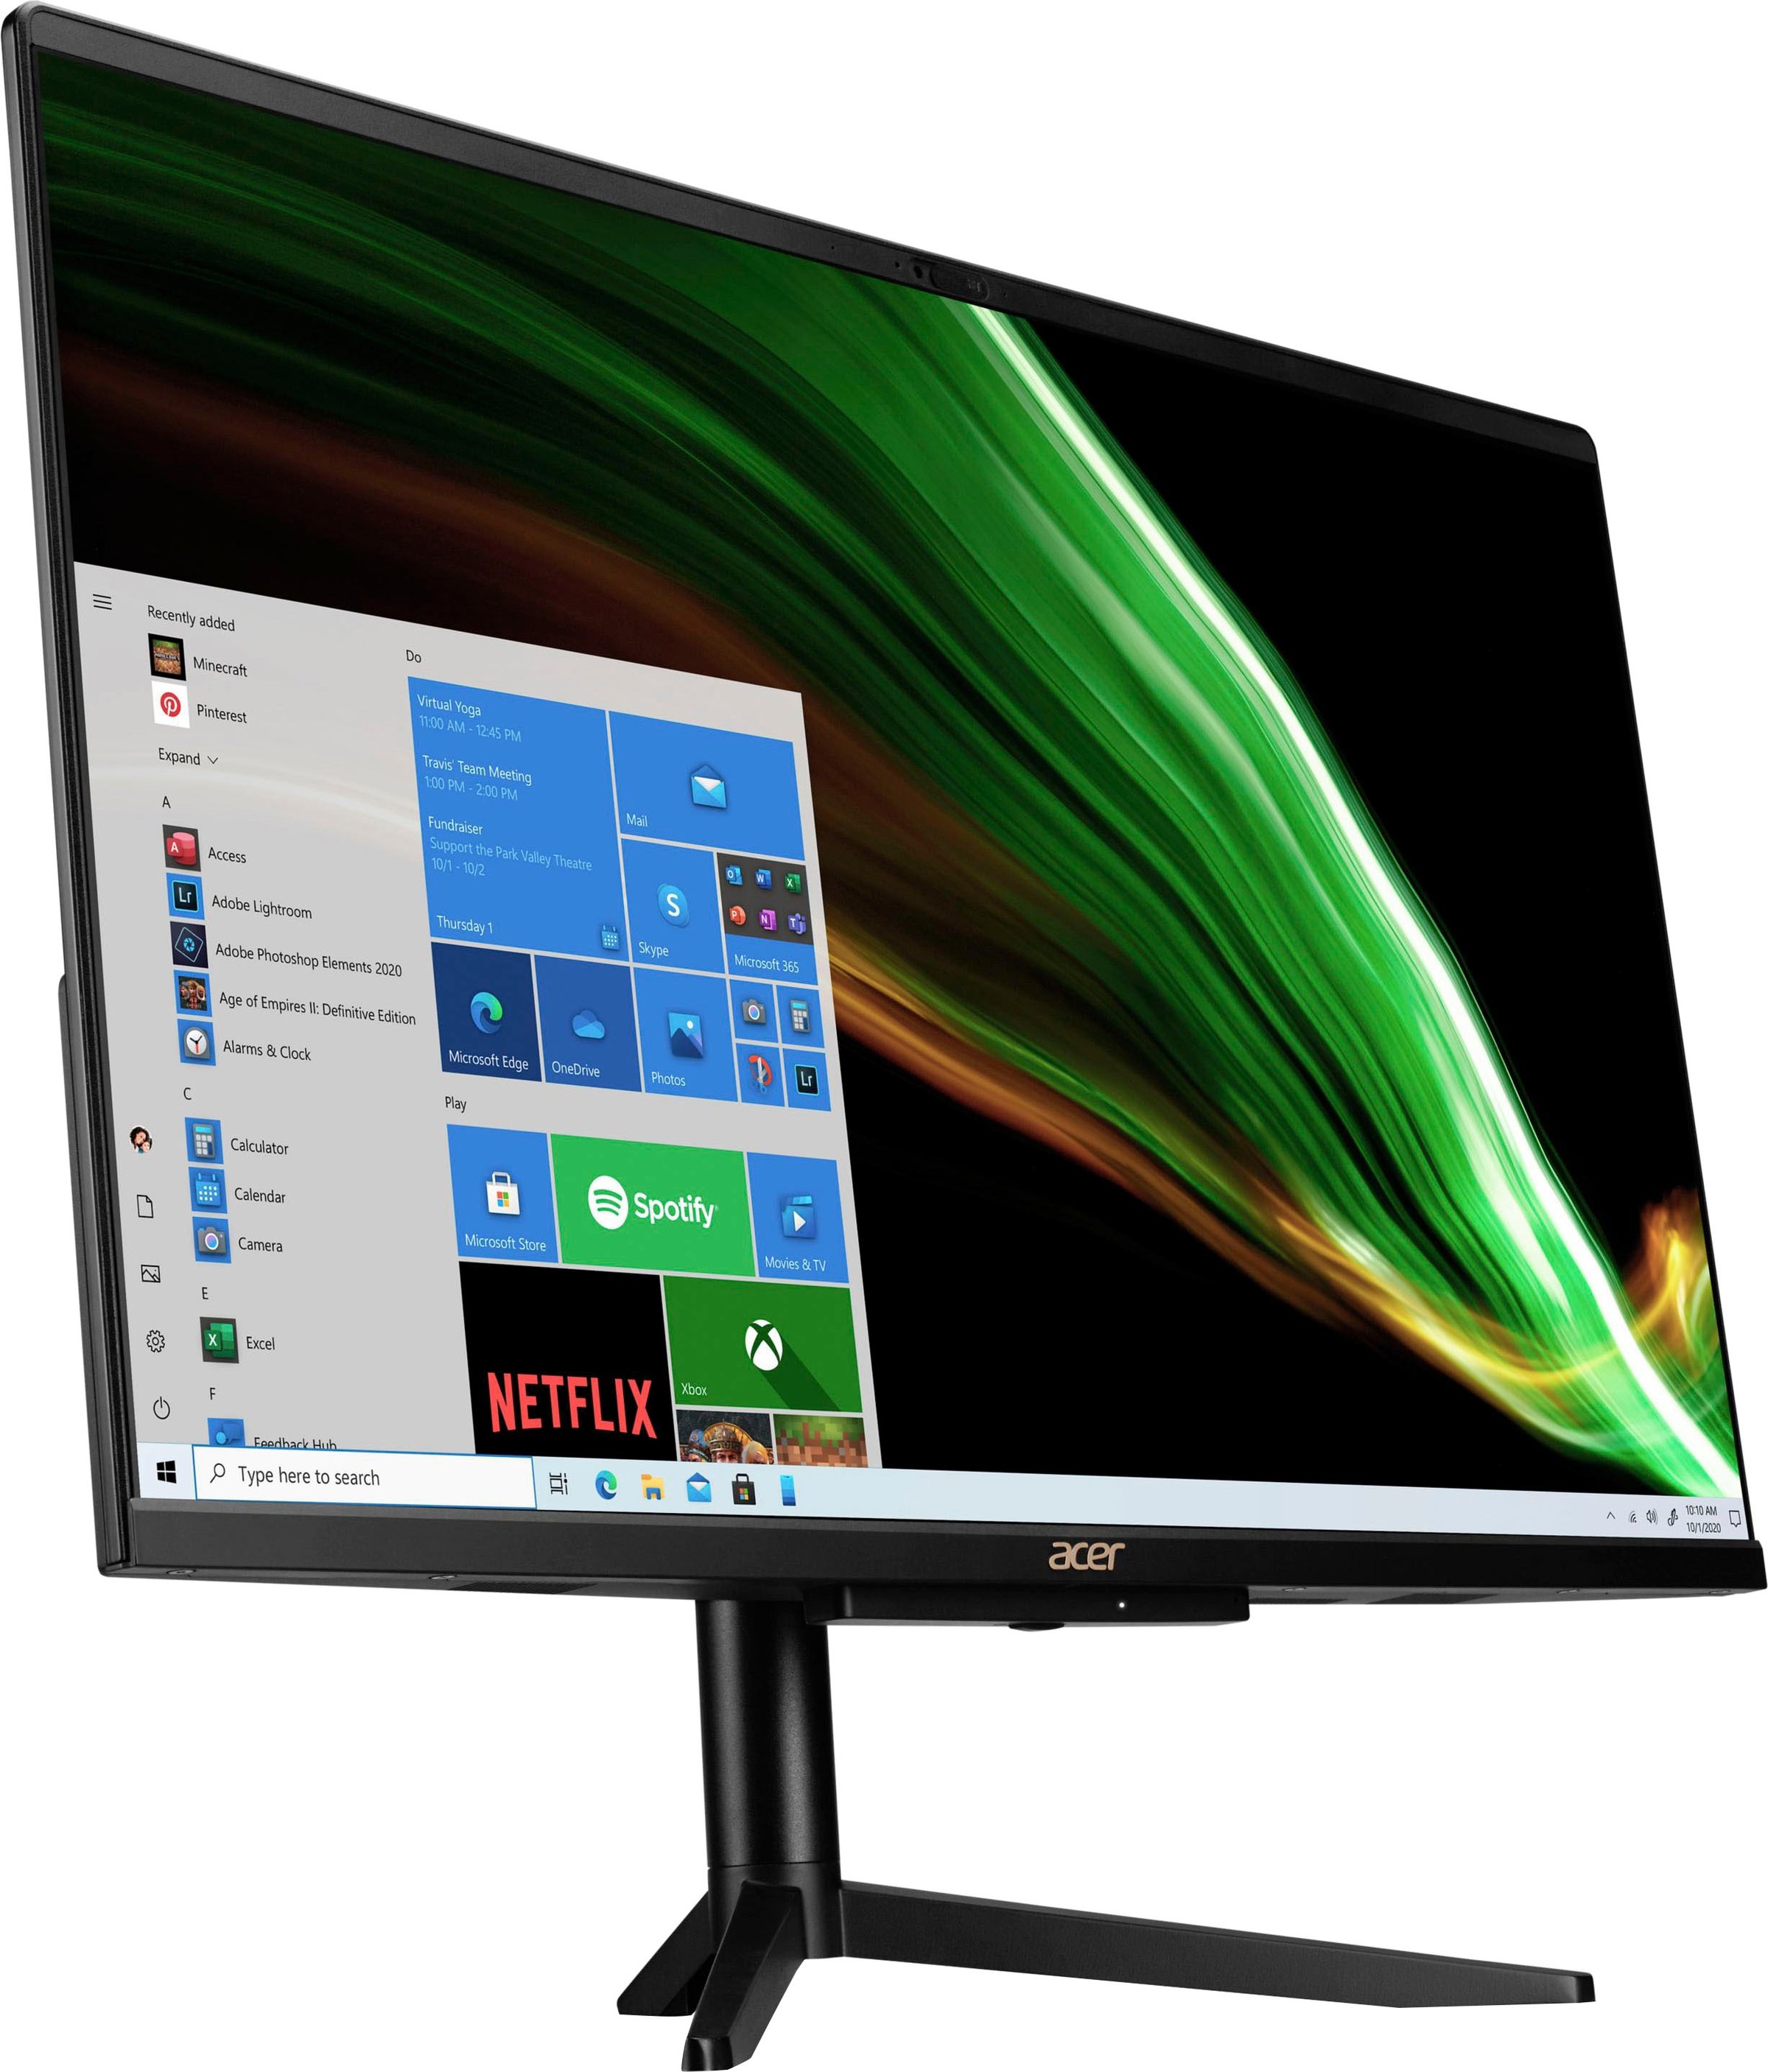 Acer All-in-One PC »Aspire C24-1600« BAUR 